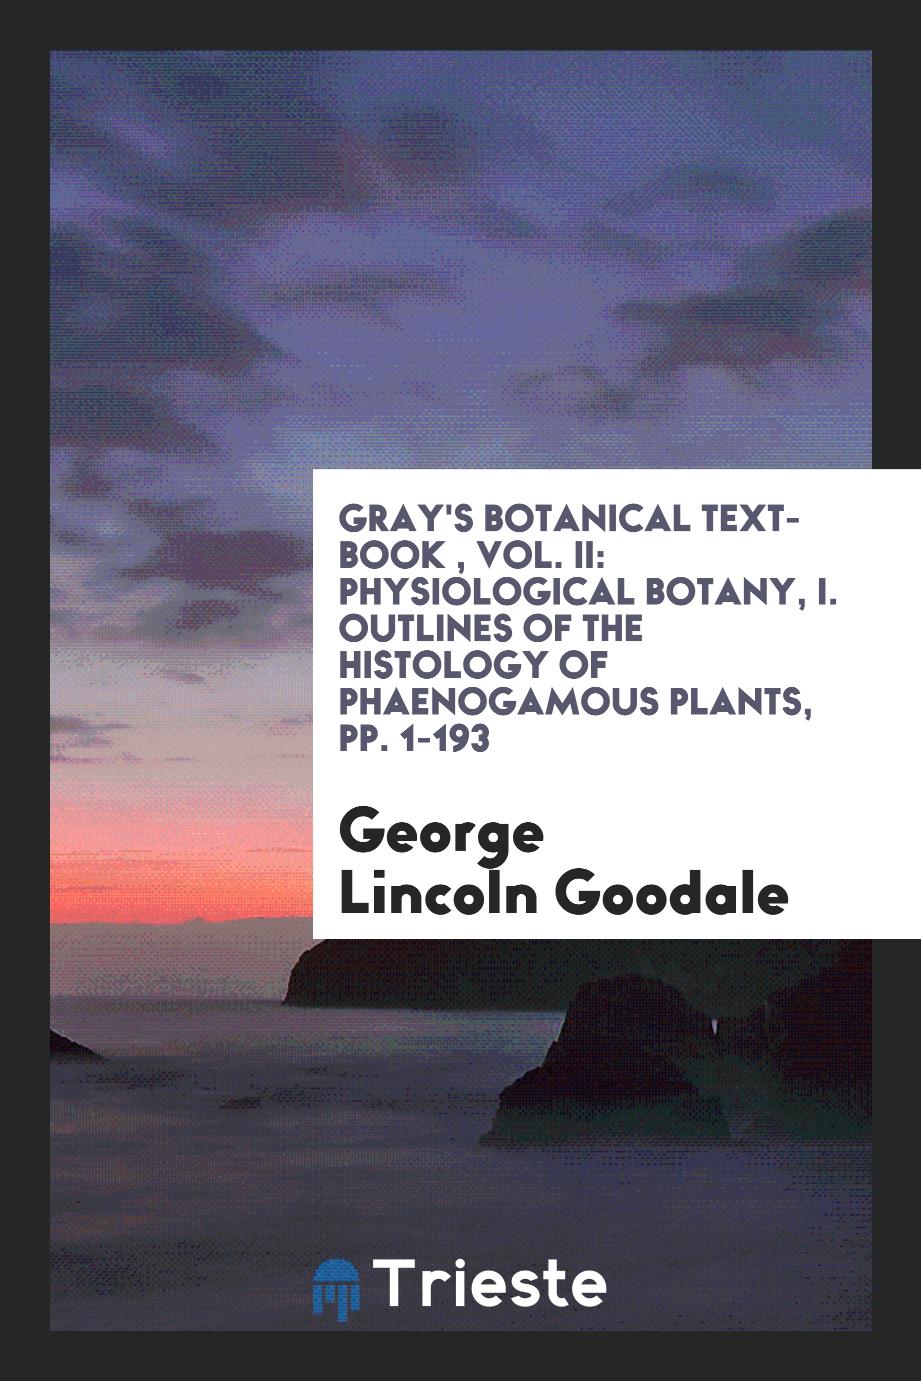 Gray's Botanical Text-Book , Vol. II: Physiological Botany, I. Outlines of the Histology of Phaenogamous Plants, pp. 1-193